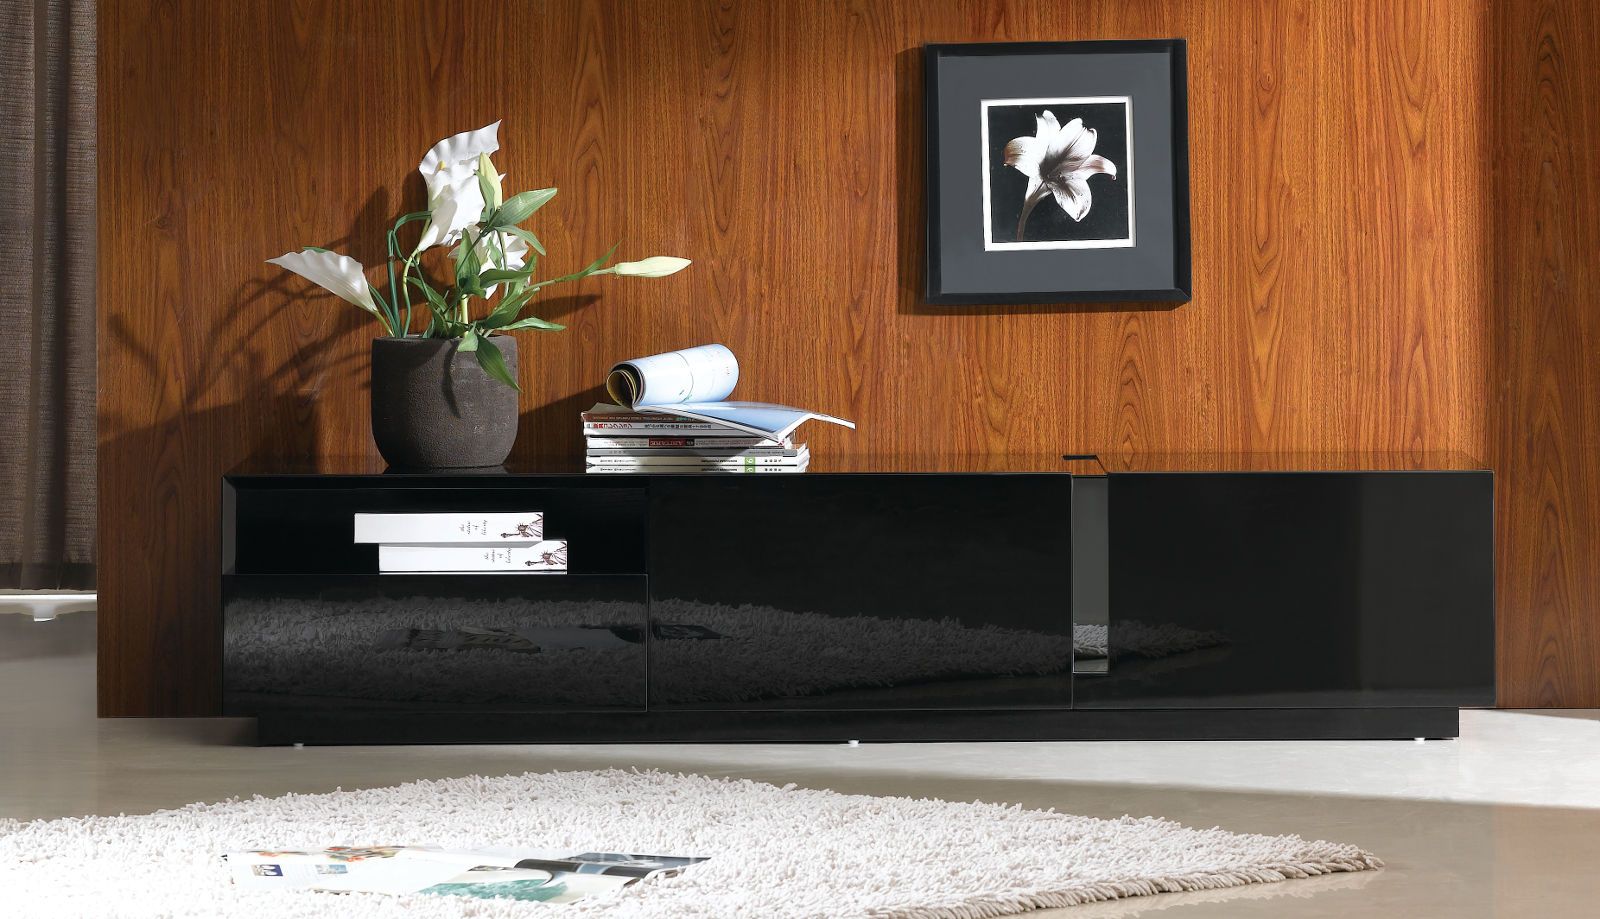 J&m Tv027 Tv Stand In Black High Gloss 176391 In Tv Cabinets Black High Gloss (View 10 of 15)